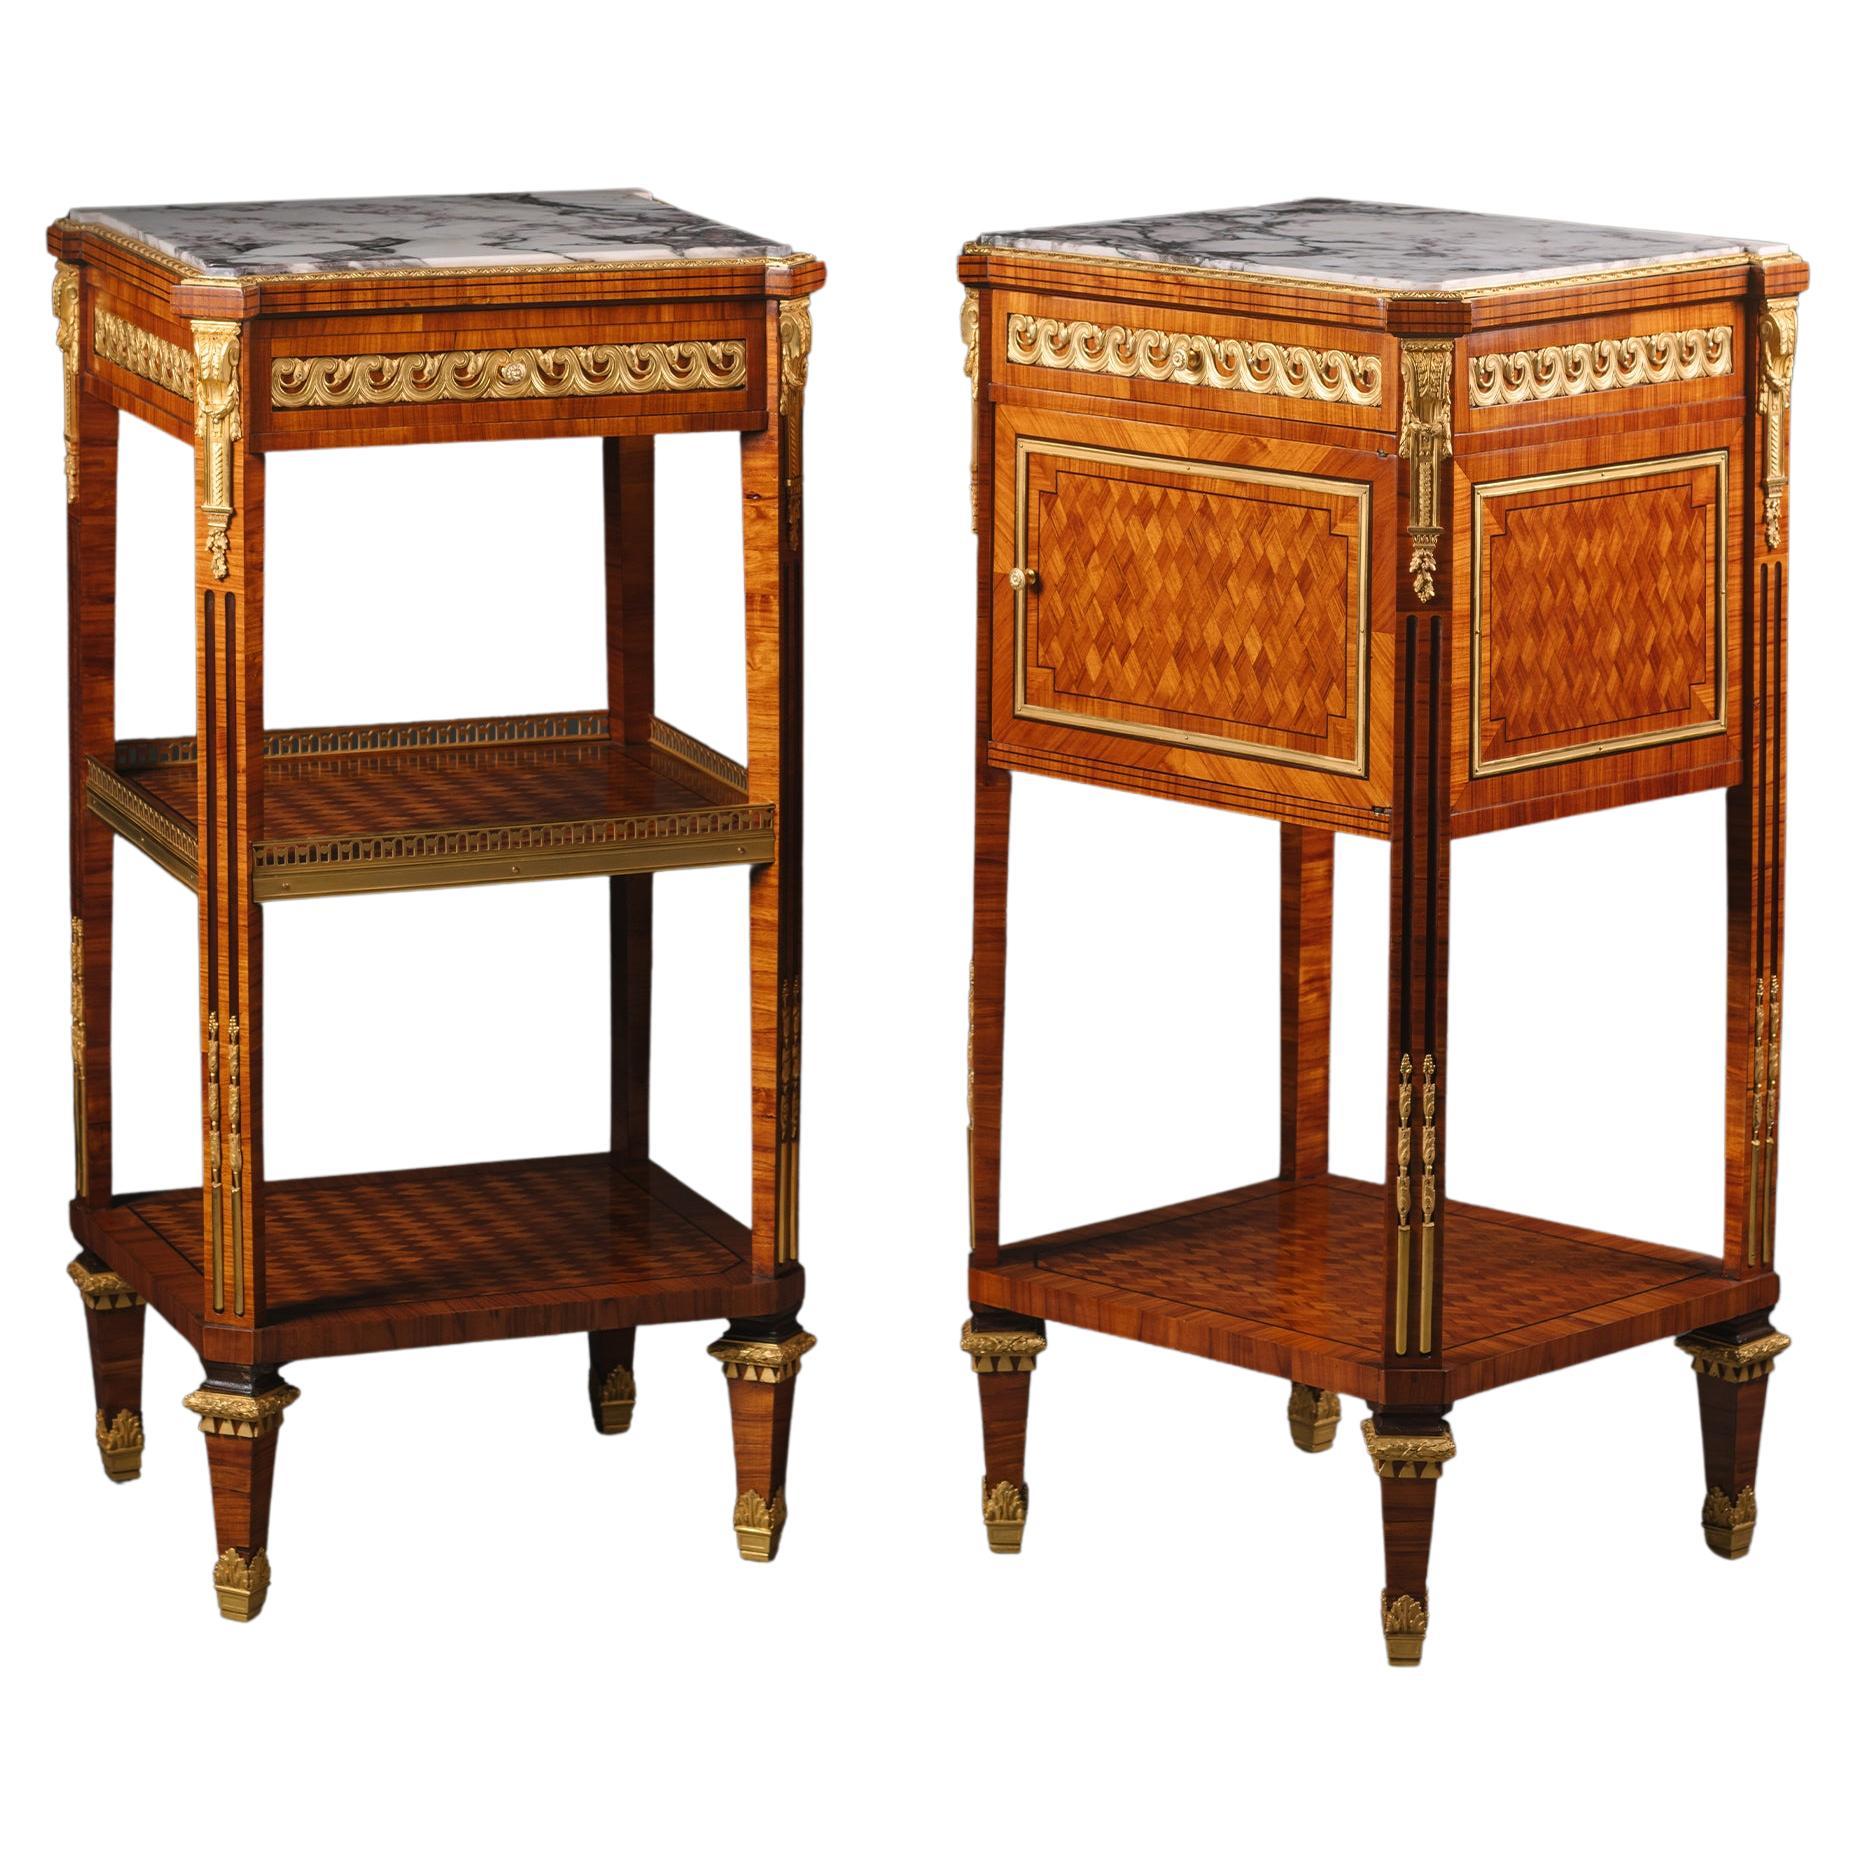 Pair of Louis XVI Style Gilt-Bronze Mounted Parquetry beside Tables For Sale